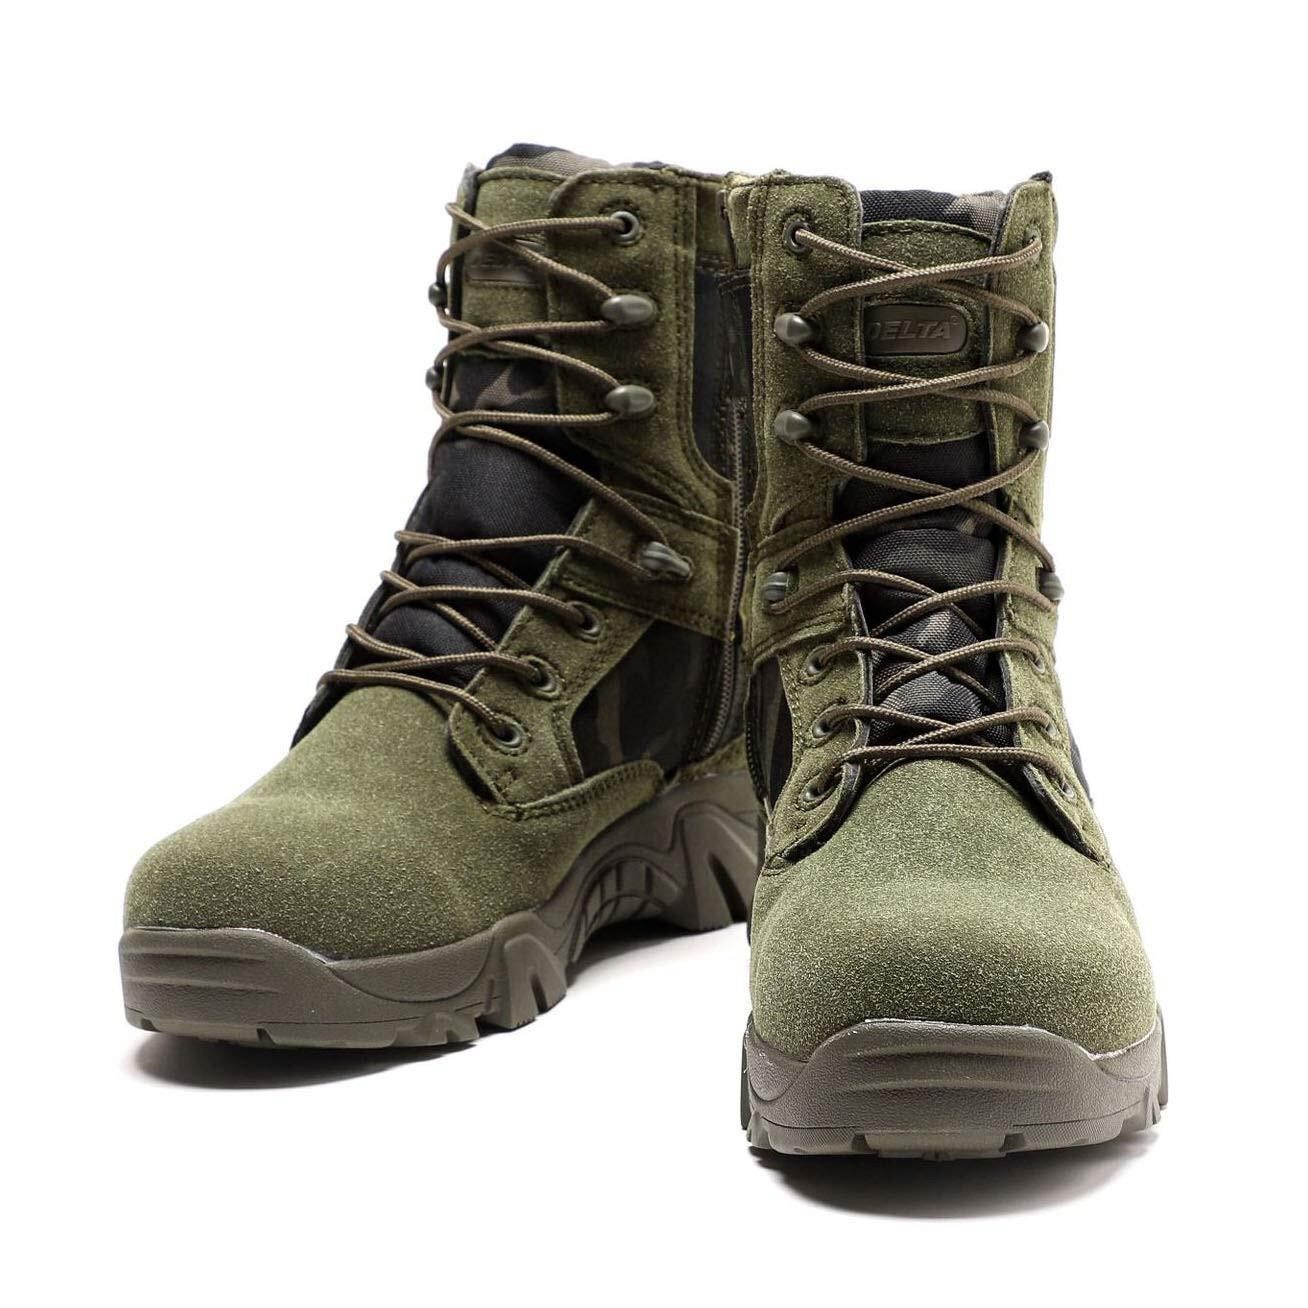 Men's Tactical Boots,High-Tops Special Training Ar